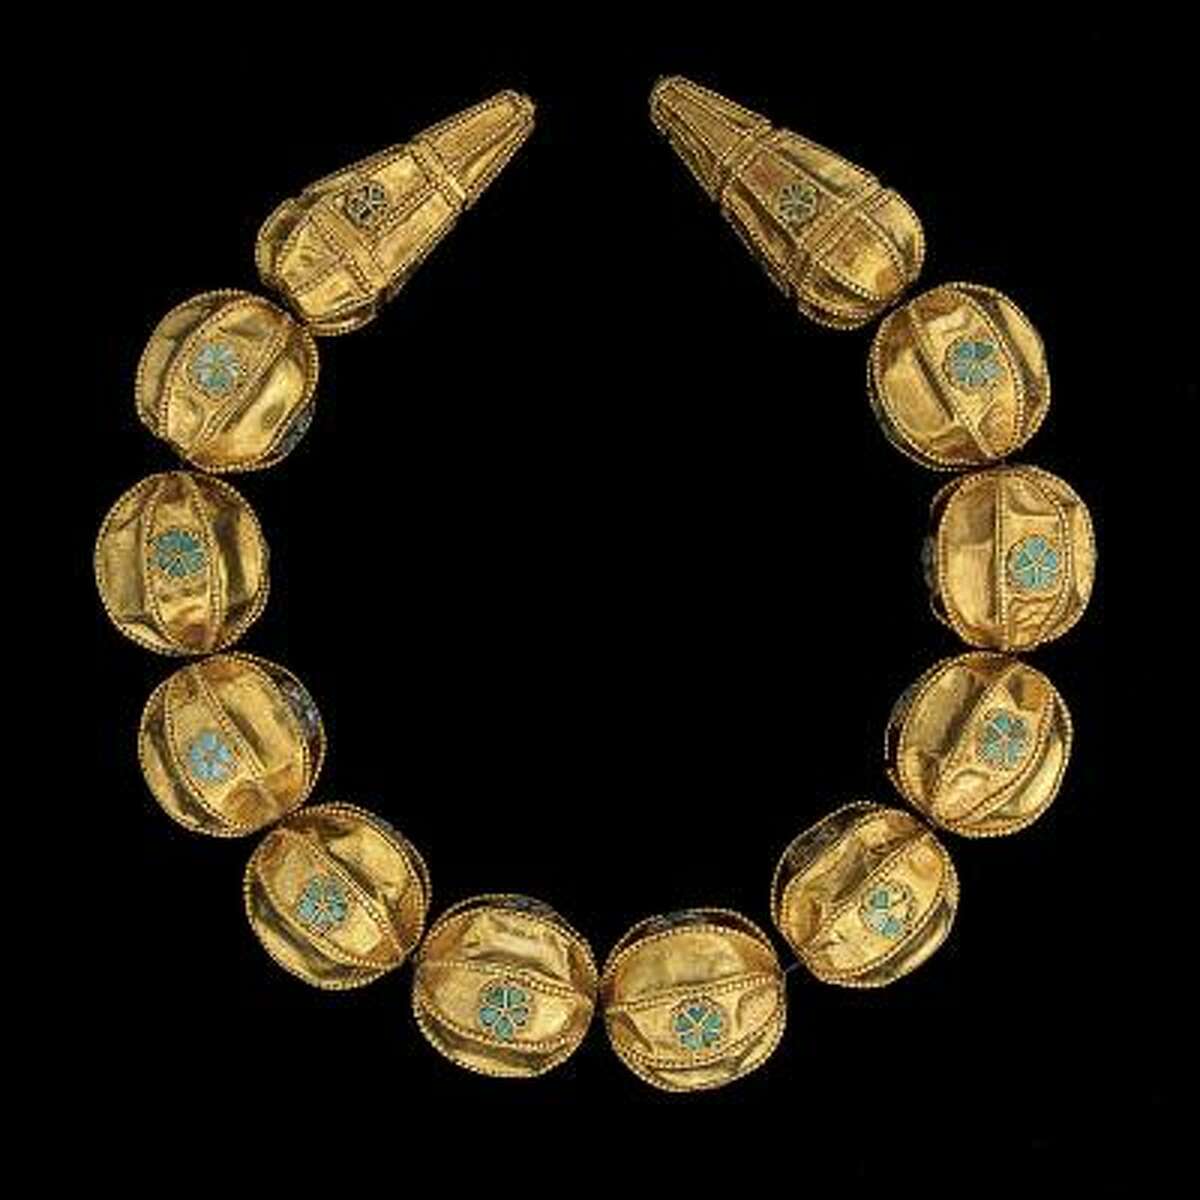 Necklace with granulated gold beads inlaid with turquoise found in the principal female burial excavated by Viktor Sarianidi in 1978. Early 1st century A.D. Gold, turquoise.